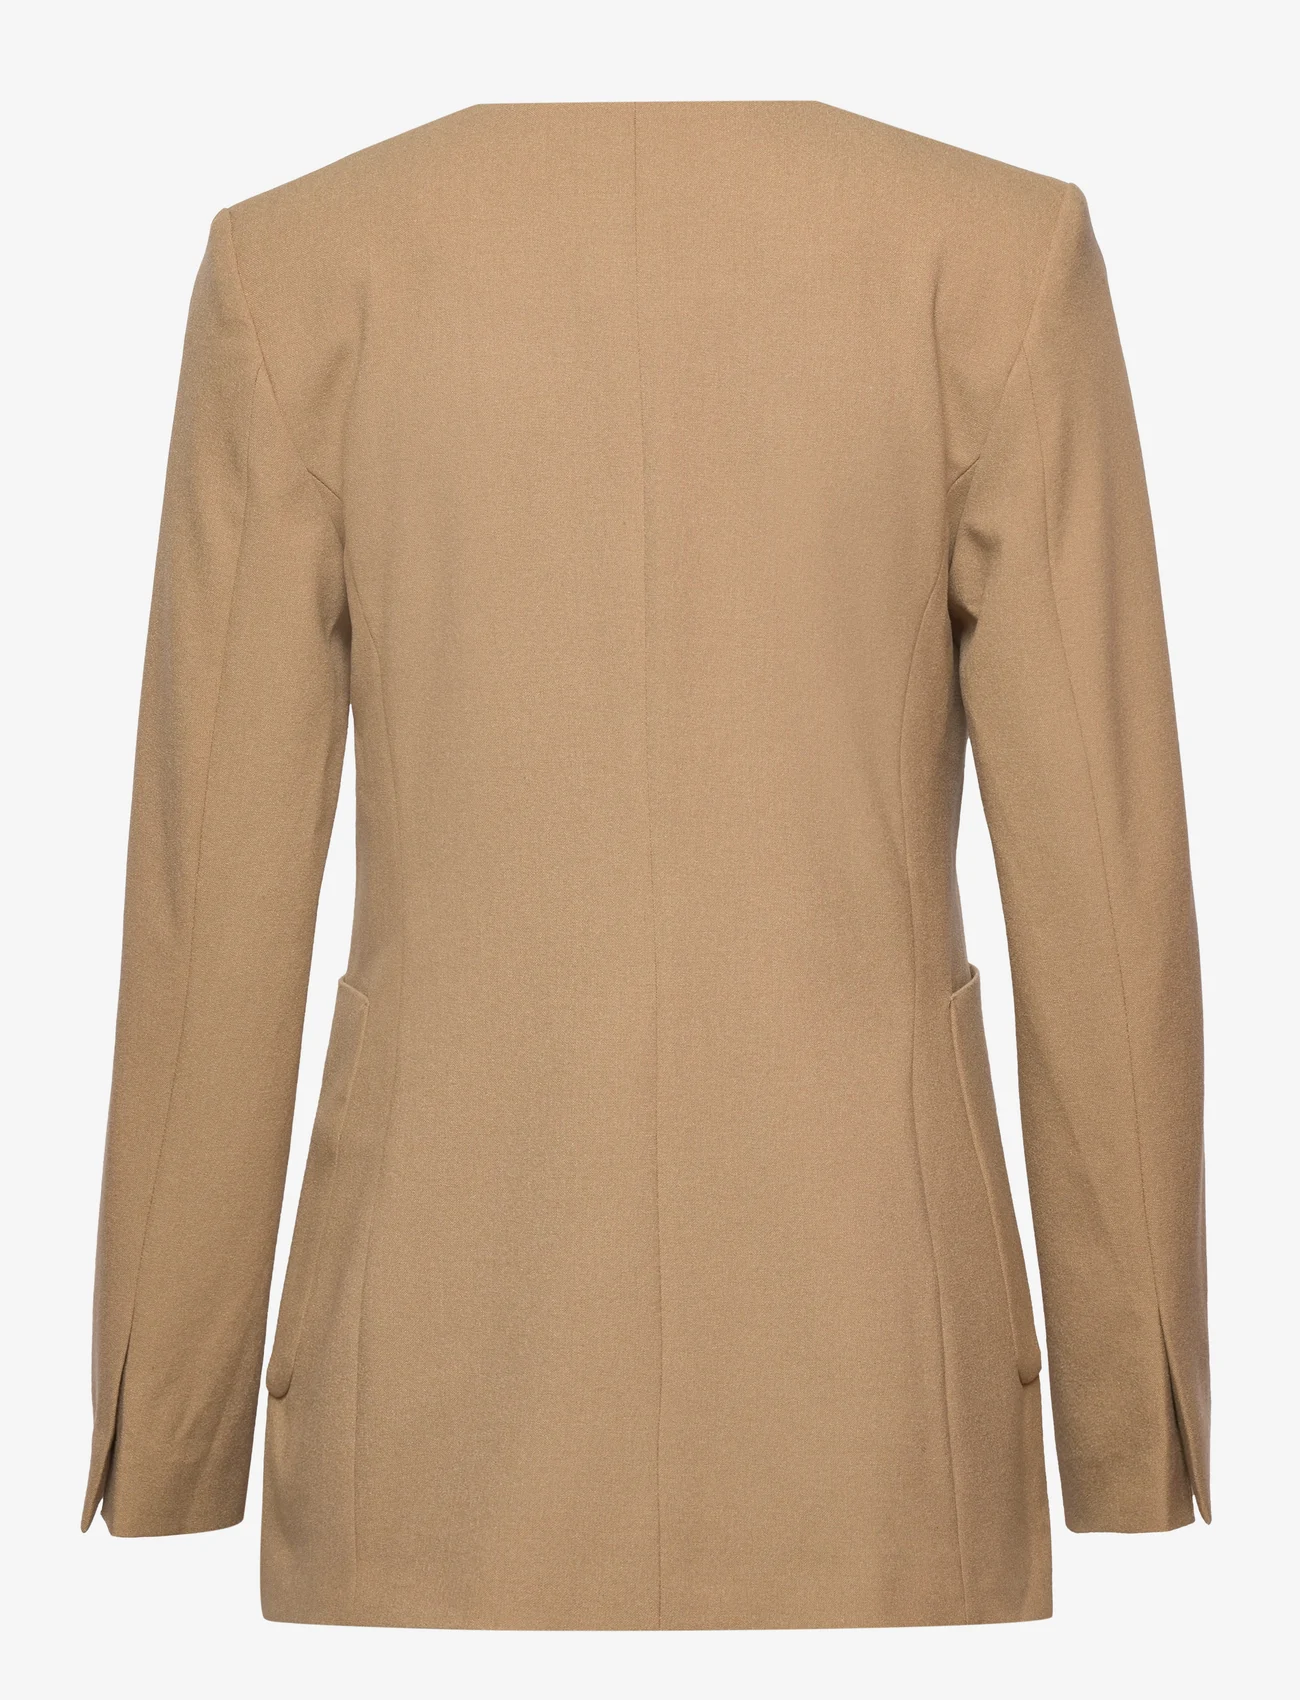 RODEBJER - Rodebjer Noomi - party wear at outlet prices - camel - 1